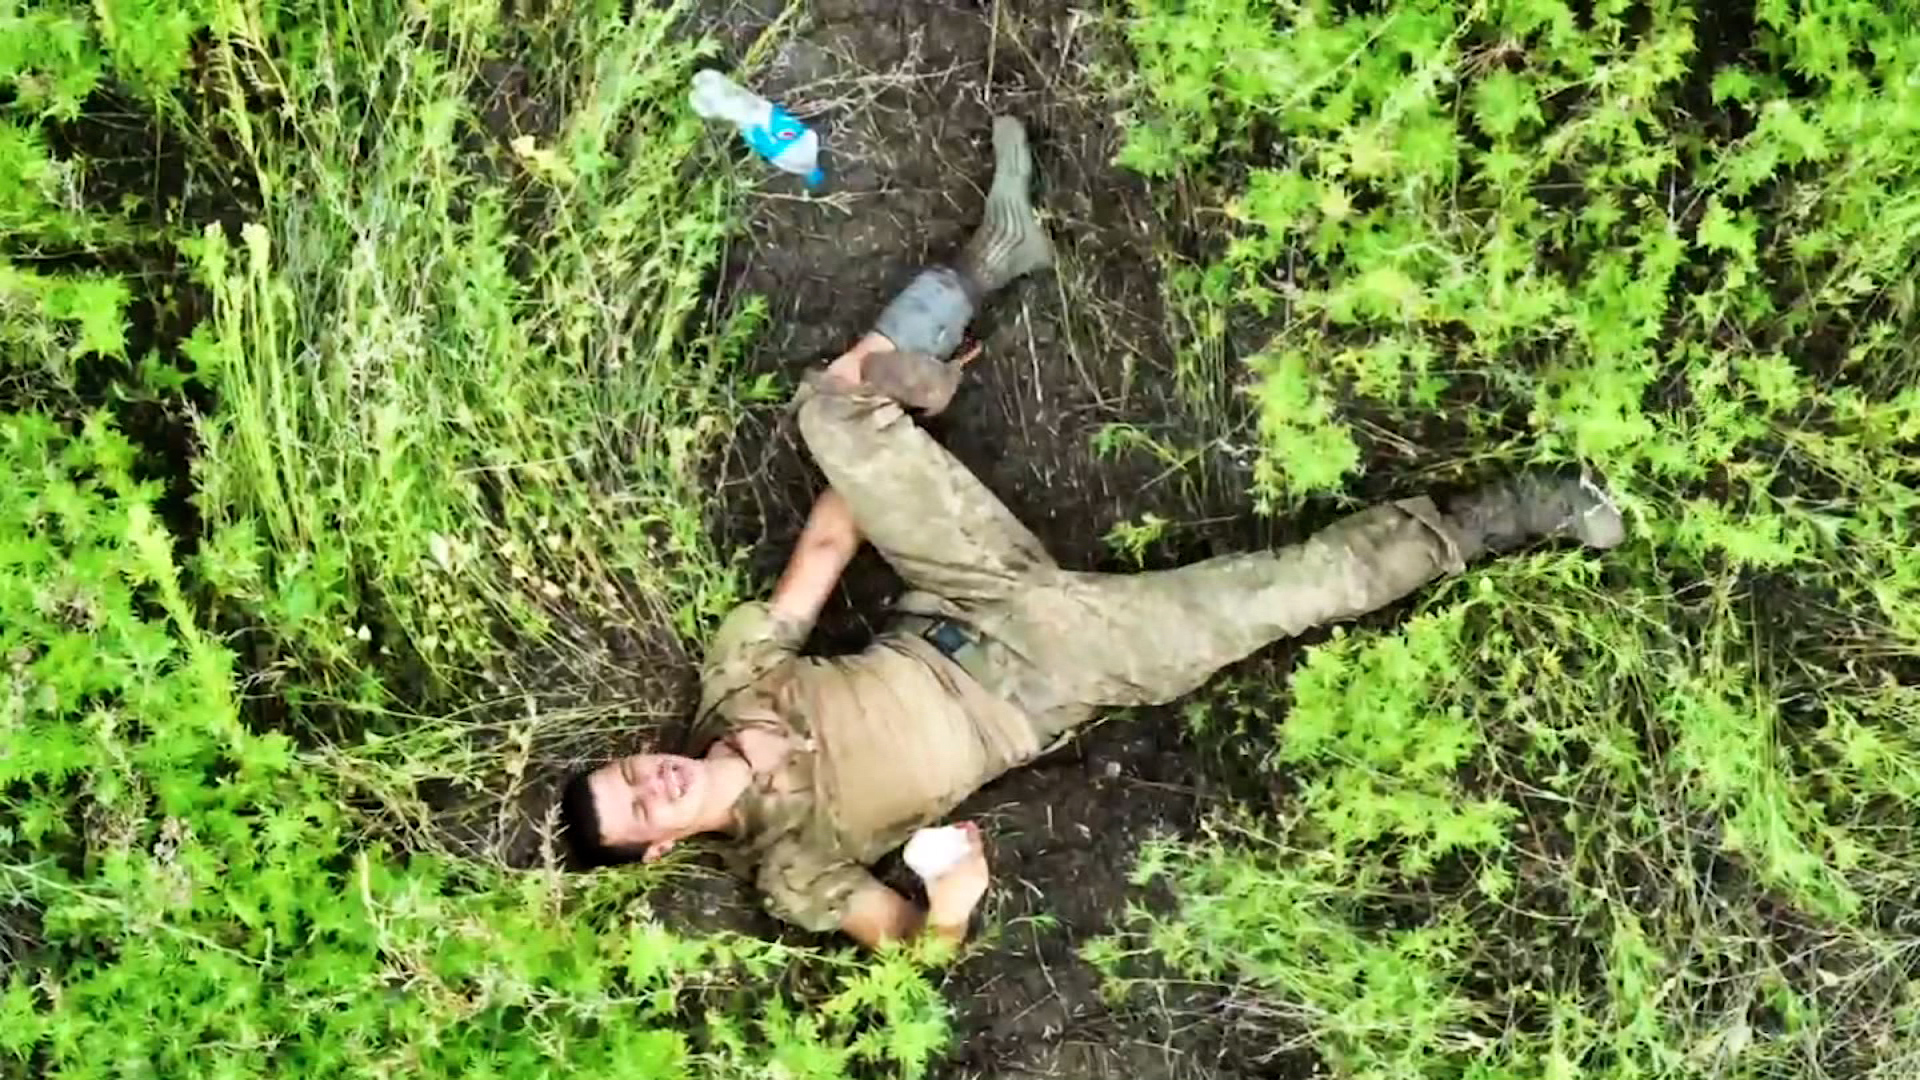 Drone footage shows wounded Ukrainian soldier, Serhiy, as he awaits rescue after being separated from his unit.